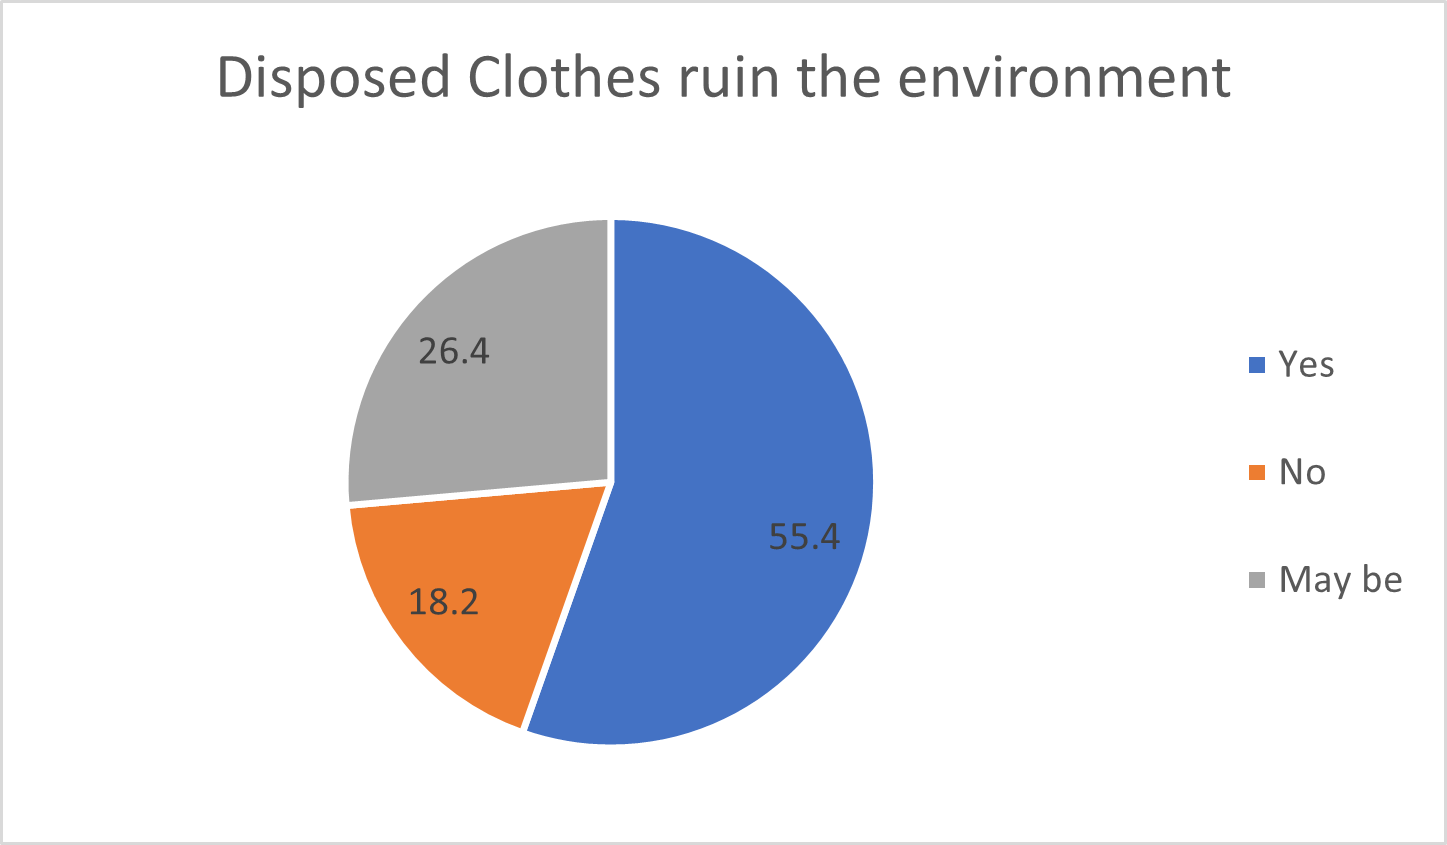 Impact of disposed clothes on environment